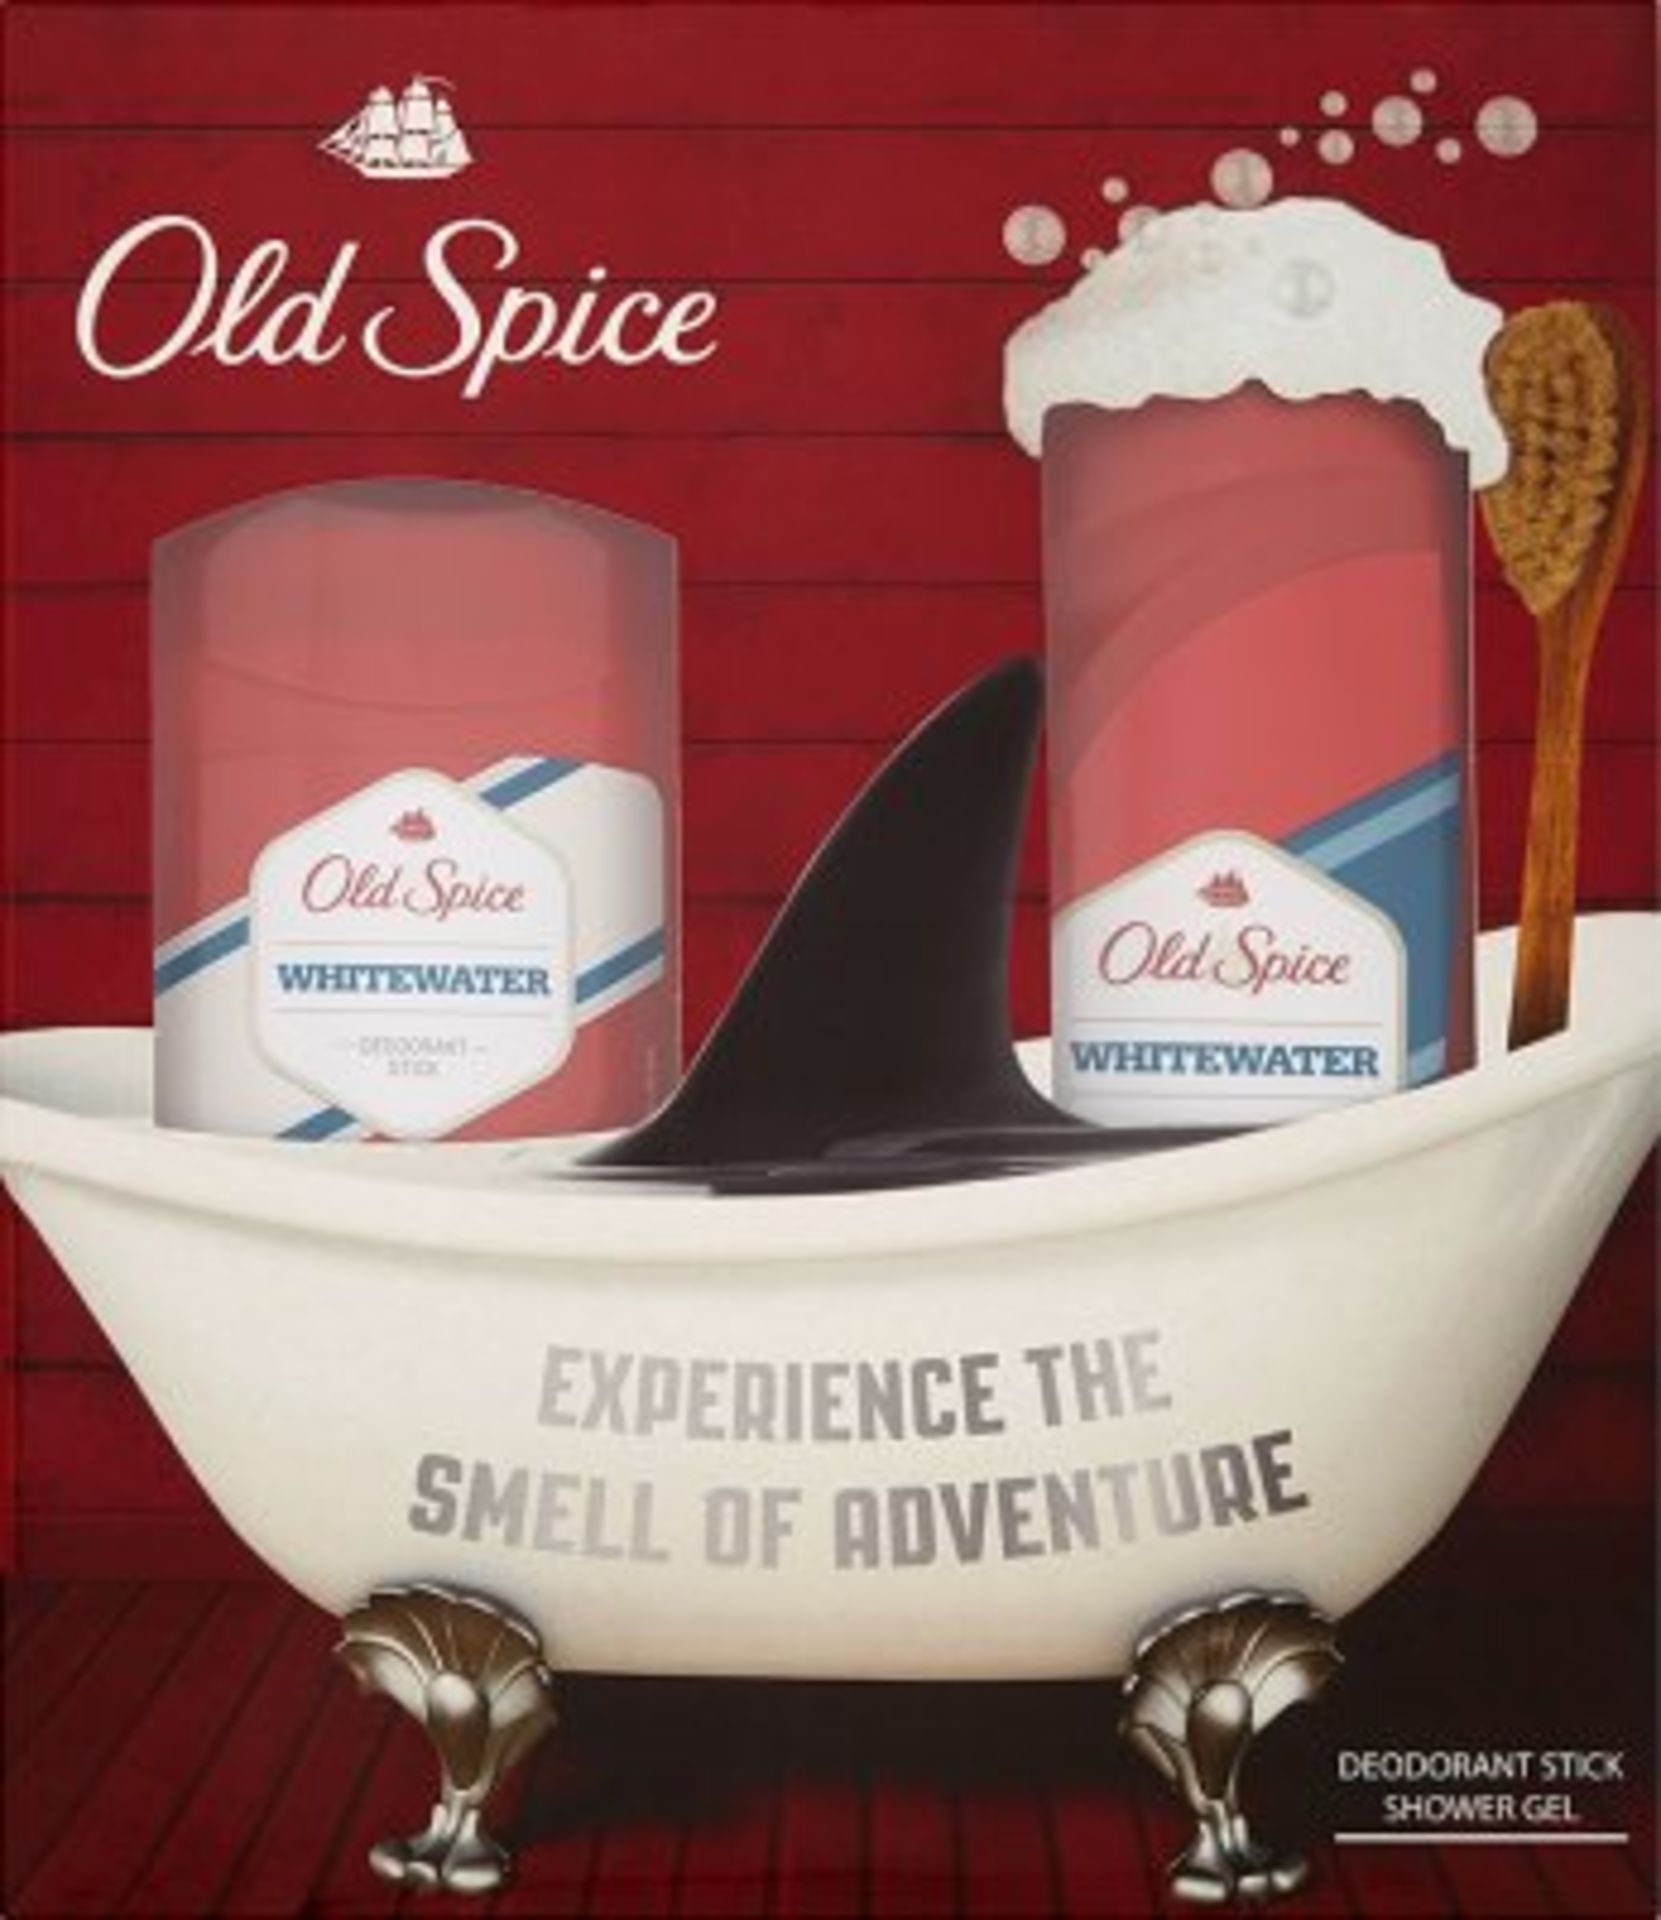 V Brand New Old Spice Whitewater Deodorant Stick And Shower Gel ISP £7.99 (ebay) X 2 YOUR BID